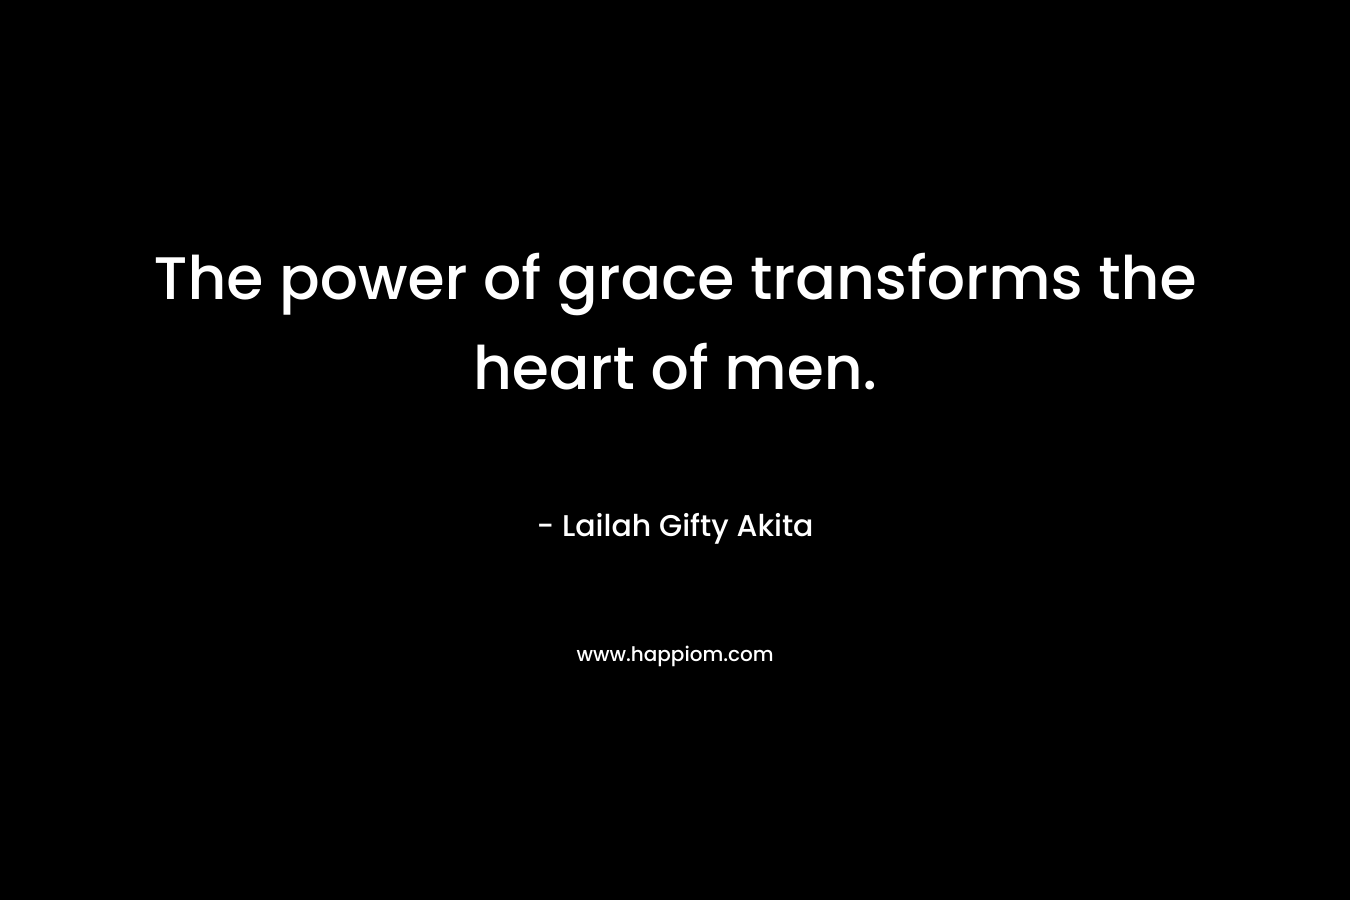 The power of grace transforms the heart of men.